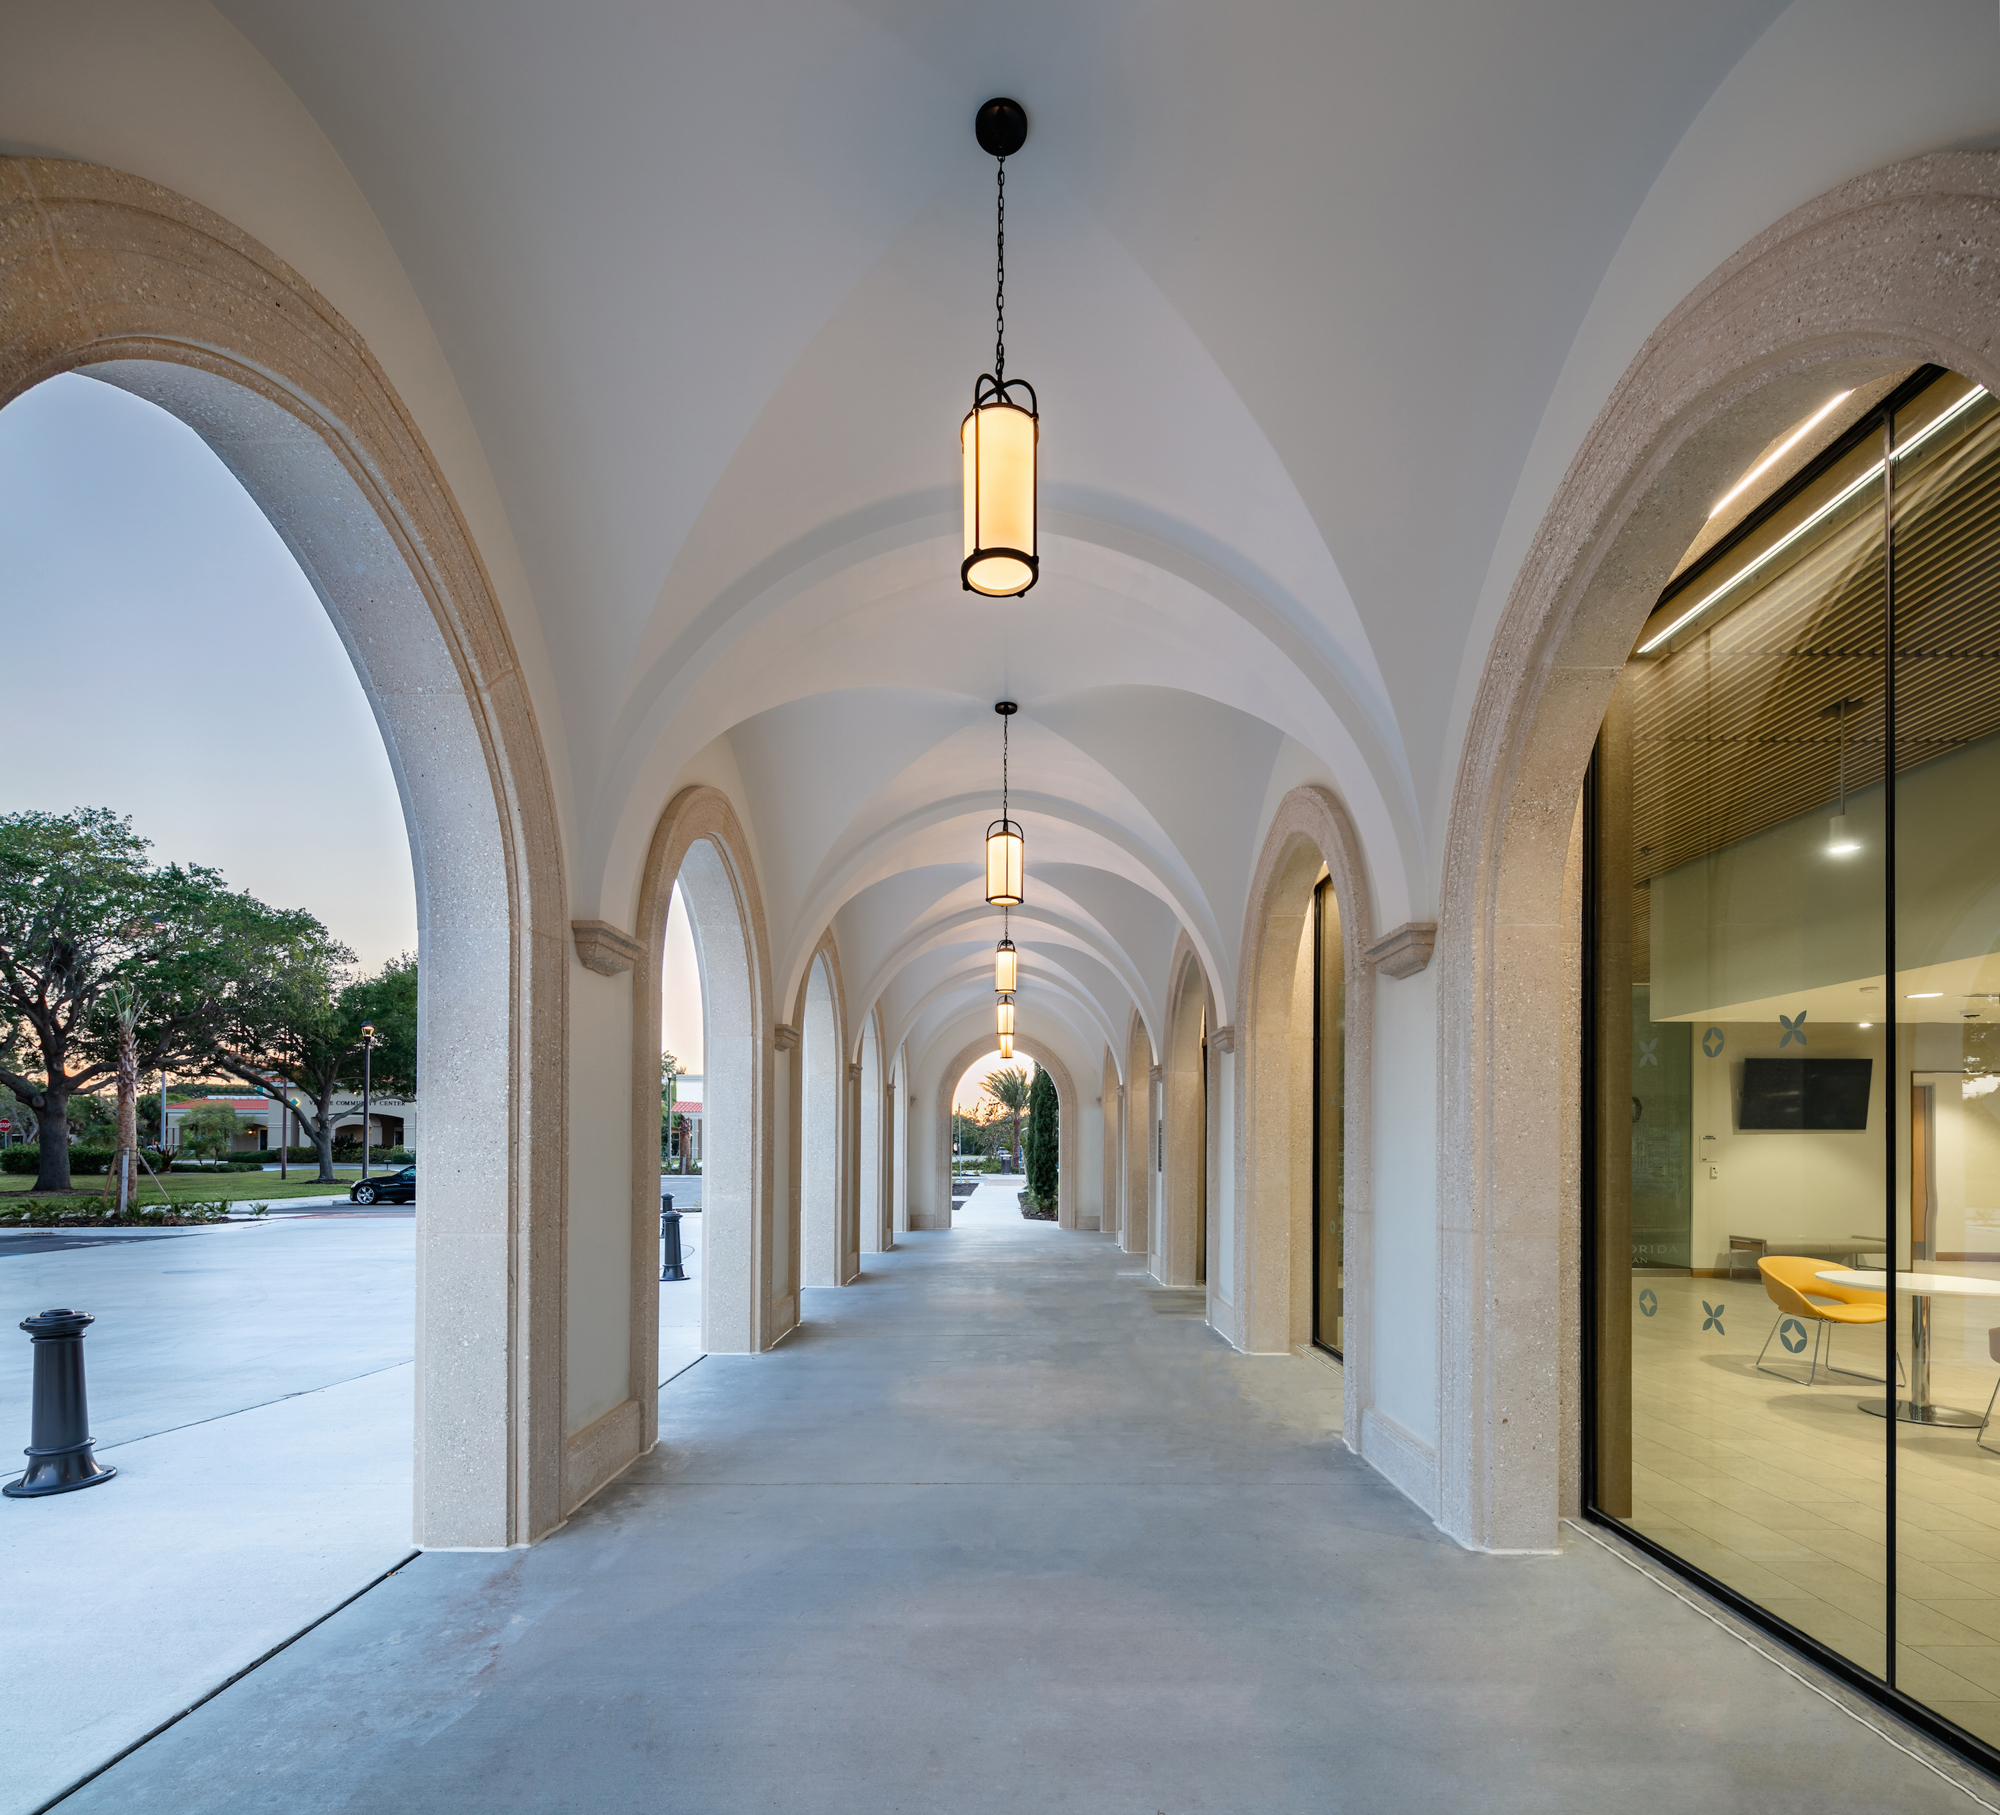 Courtesy, Sweet Sparkman Architects. Gabriela Kaniuga, assistant project manager for Tandem Construction, says the building’s design includes elements such as walls of glass, metal work, tiles and groin vaults.